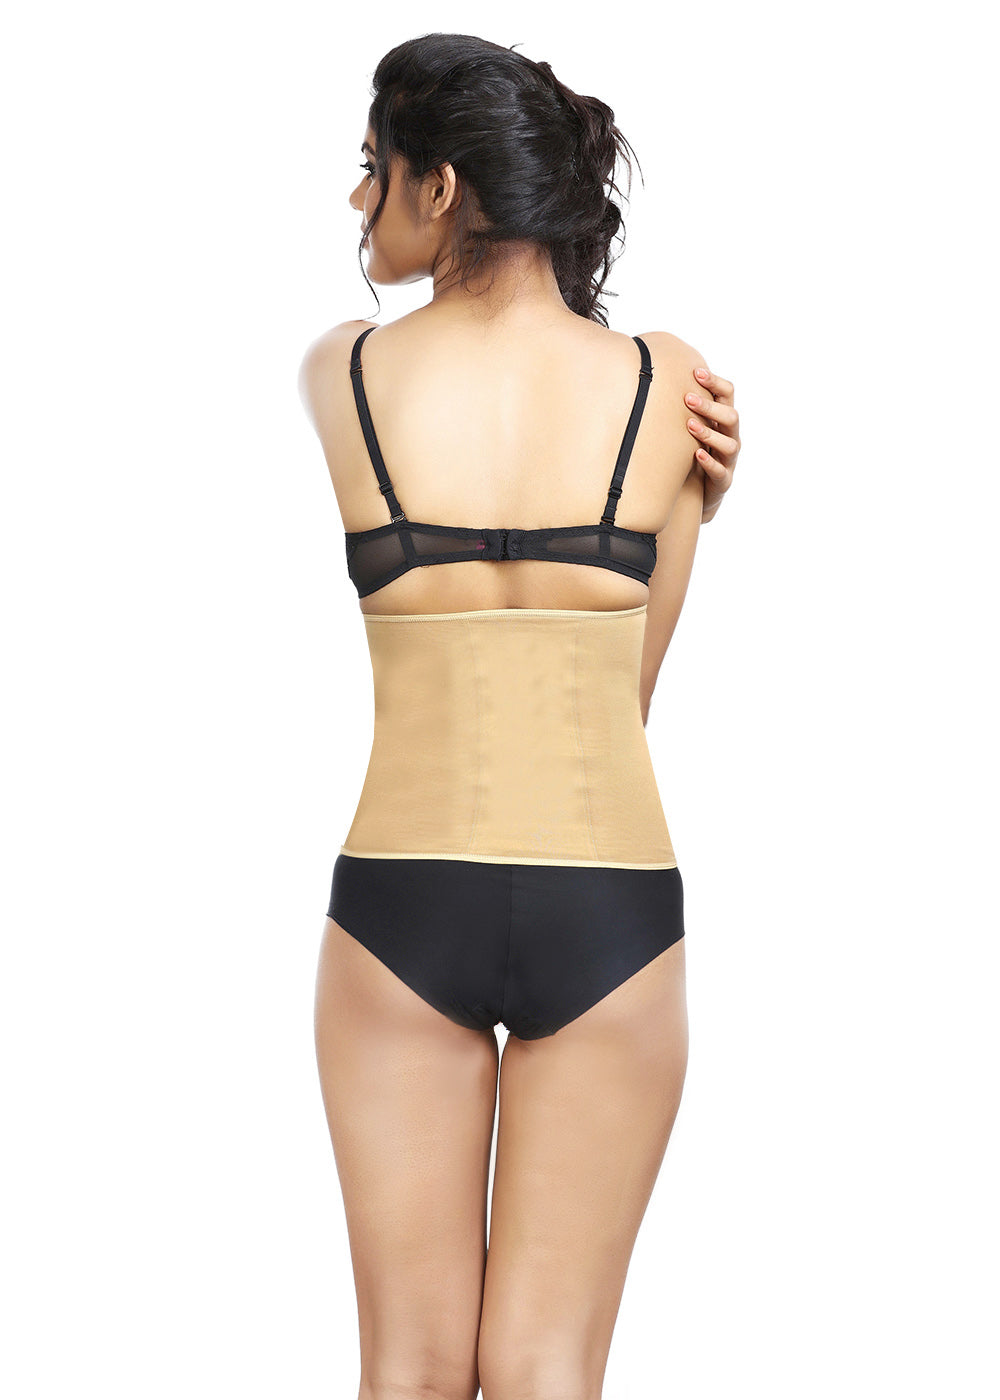 Buy ADORNA Women Cotton Stylish Spandex Blend Body Bracer for Thighs, Back,  Tummy - Stretchable Tummy Control with Adjustable Transparent Strap for  Full Body Shaping and Slimming (Beige, Multiple Sizes) at